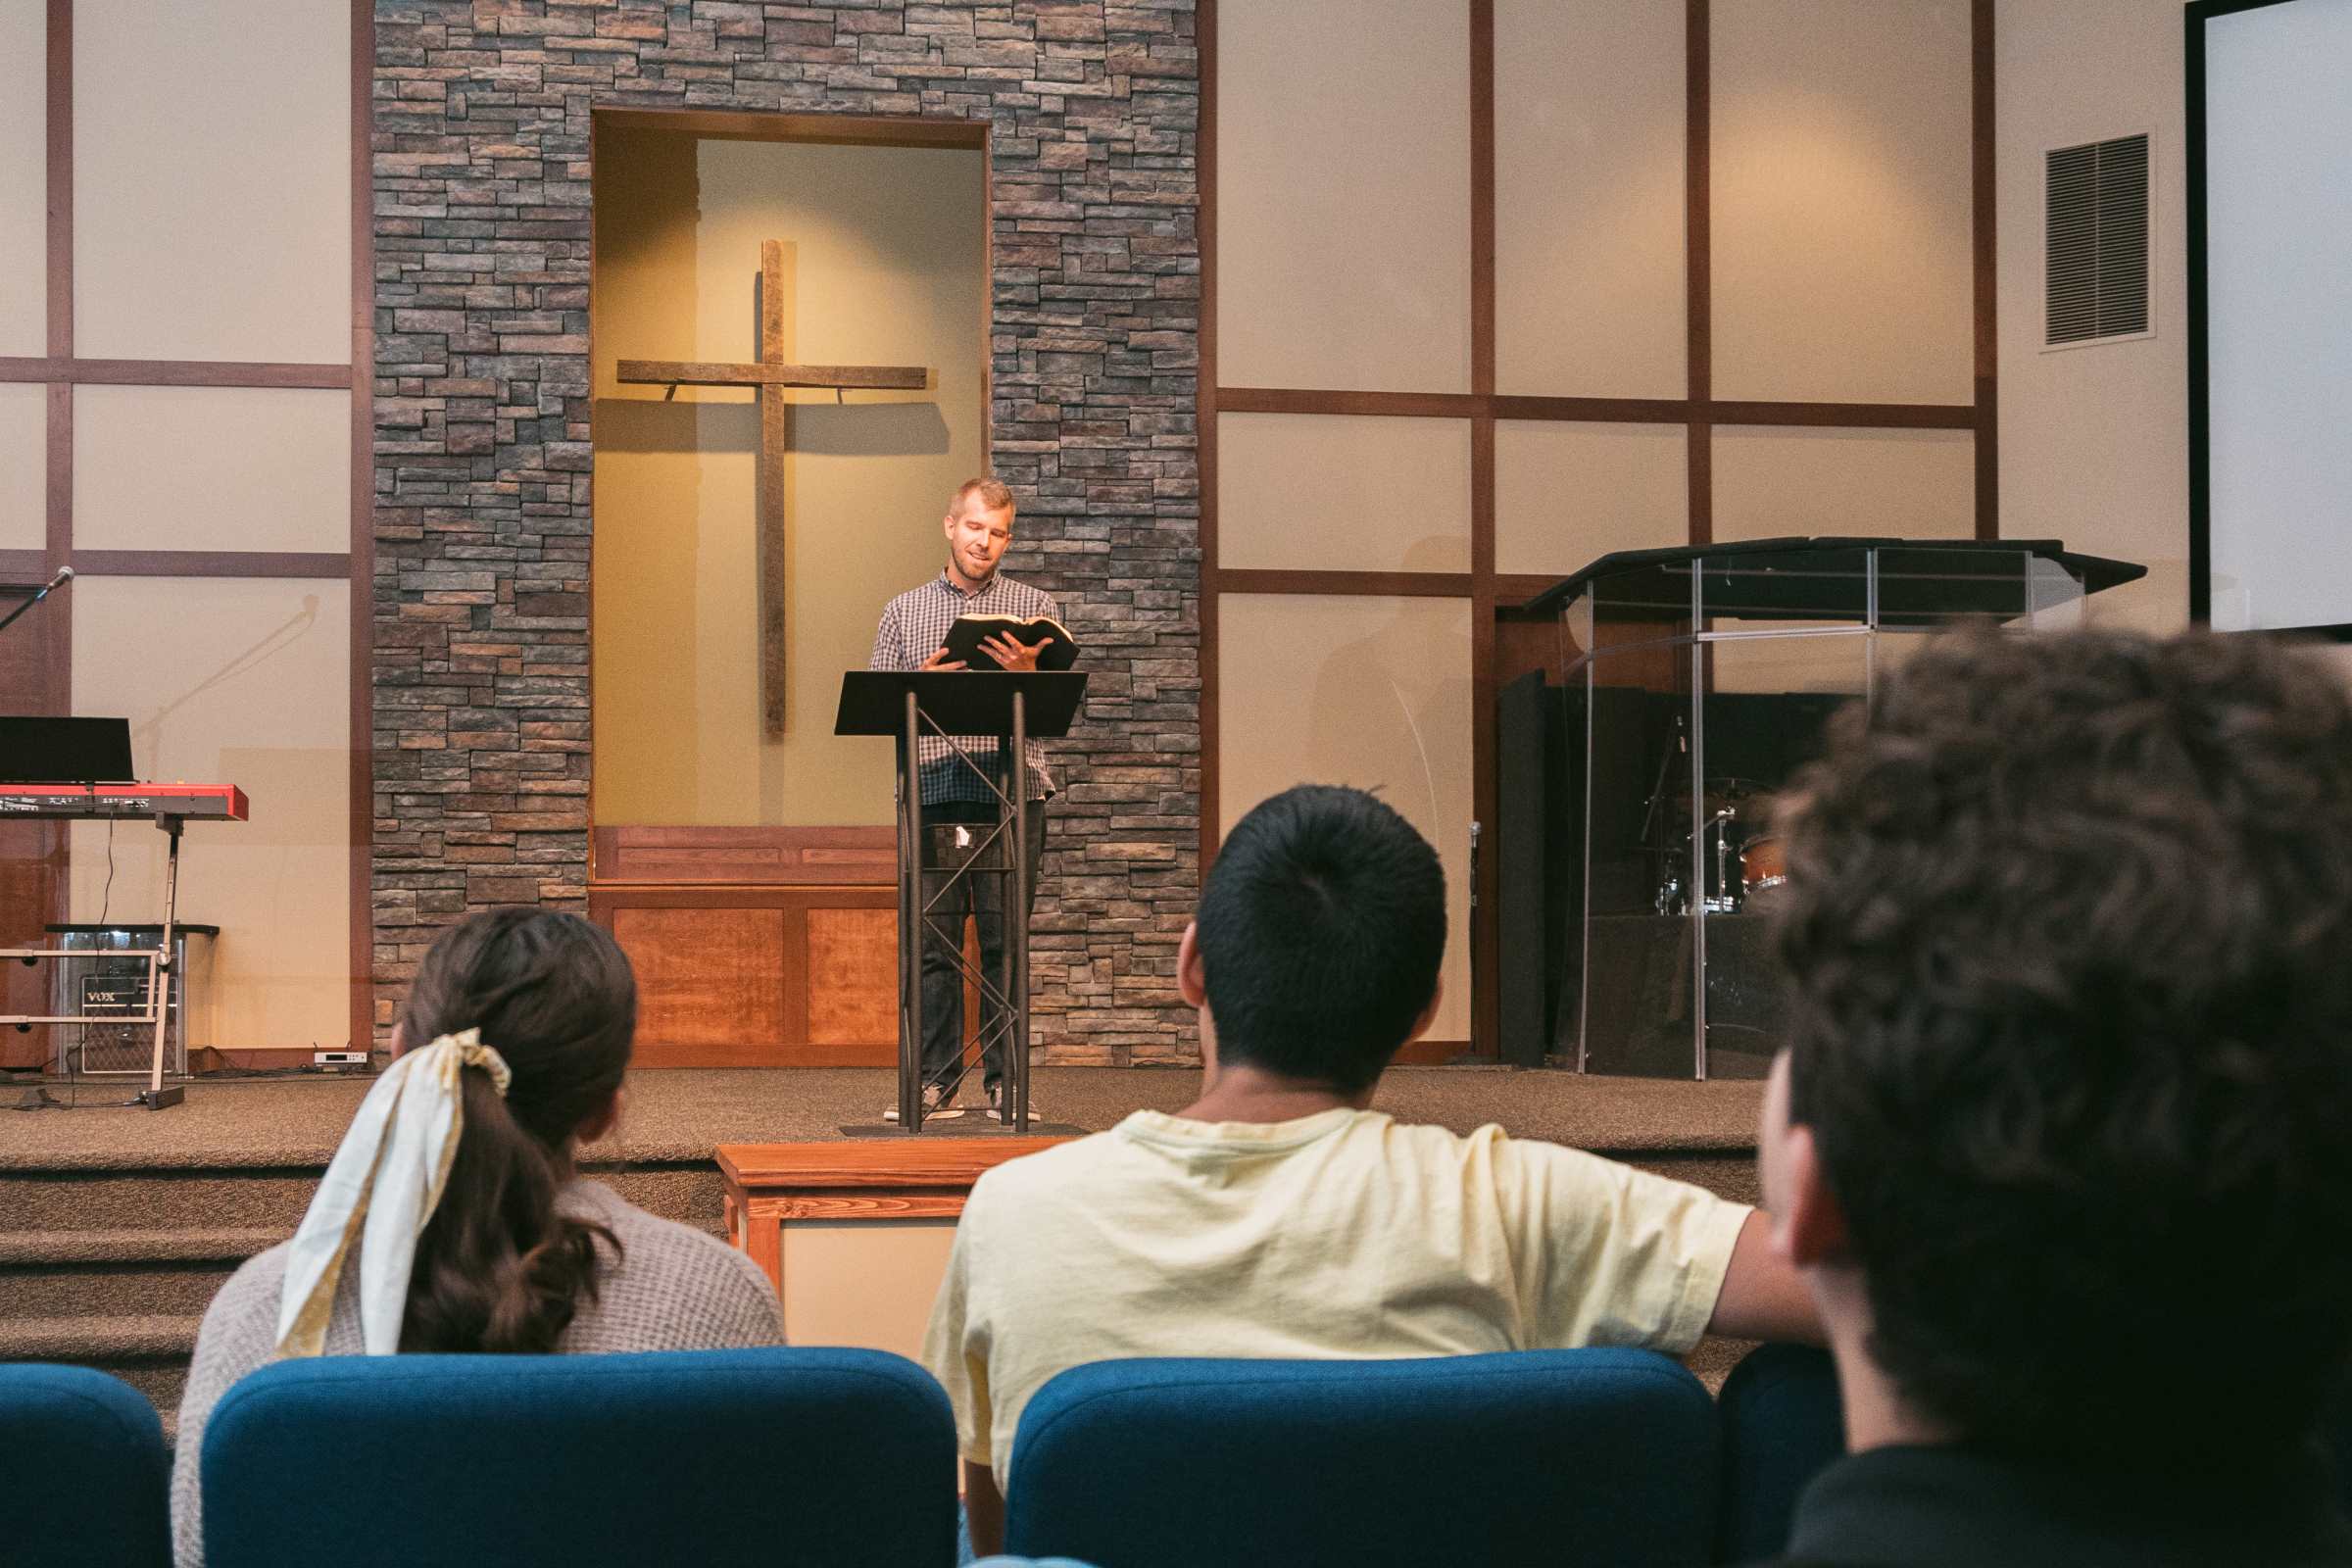 Do you know God’s purpose for your life? Get started by exploring the various Seminary programs at Grace. Get equipped to preach the word.